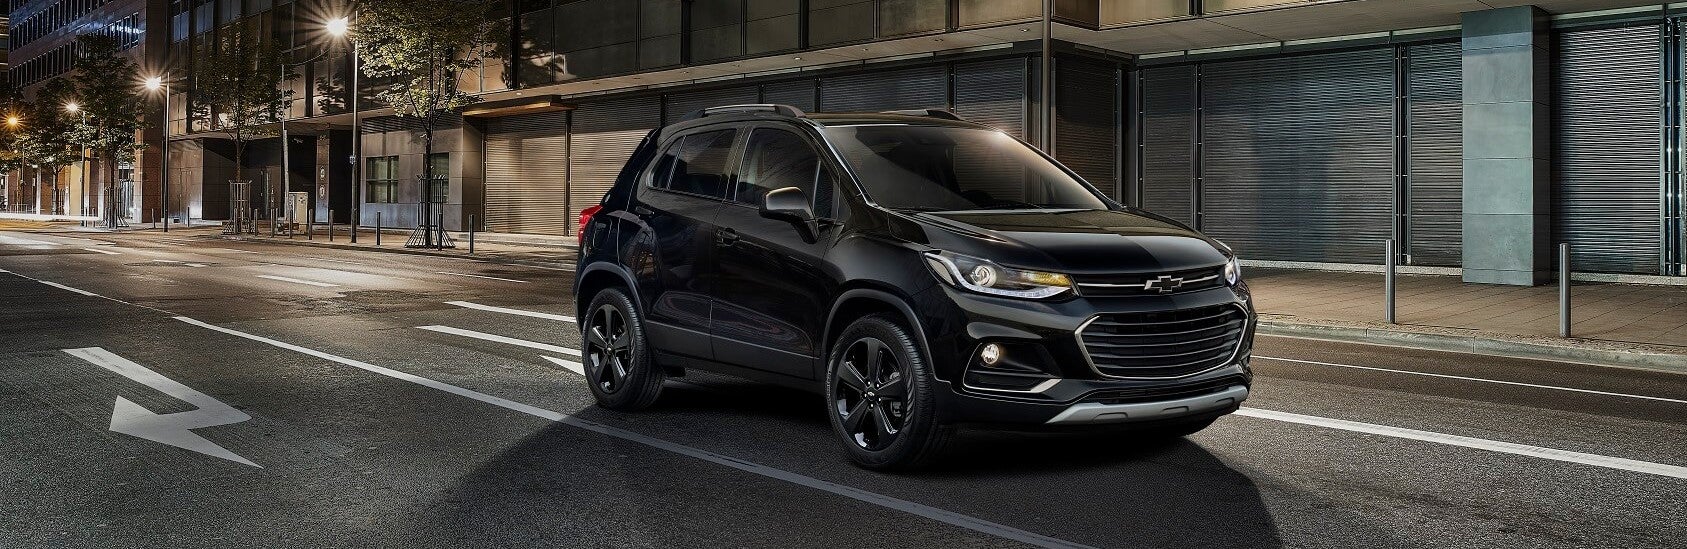 Used Chevy Trax for Sale Indianapolis IN